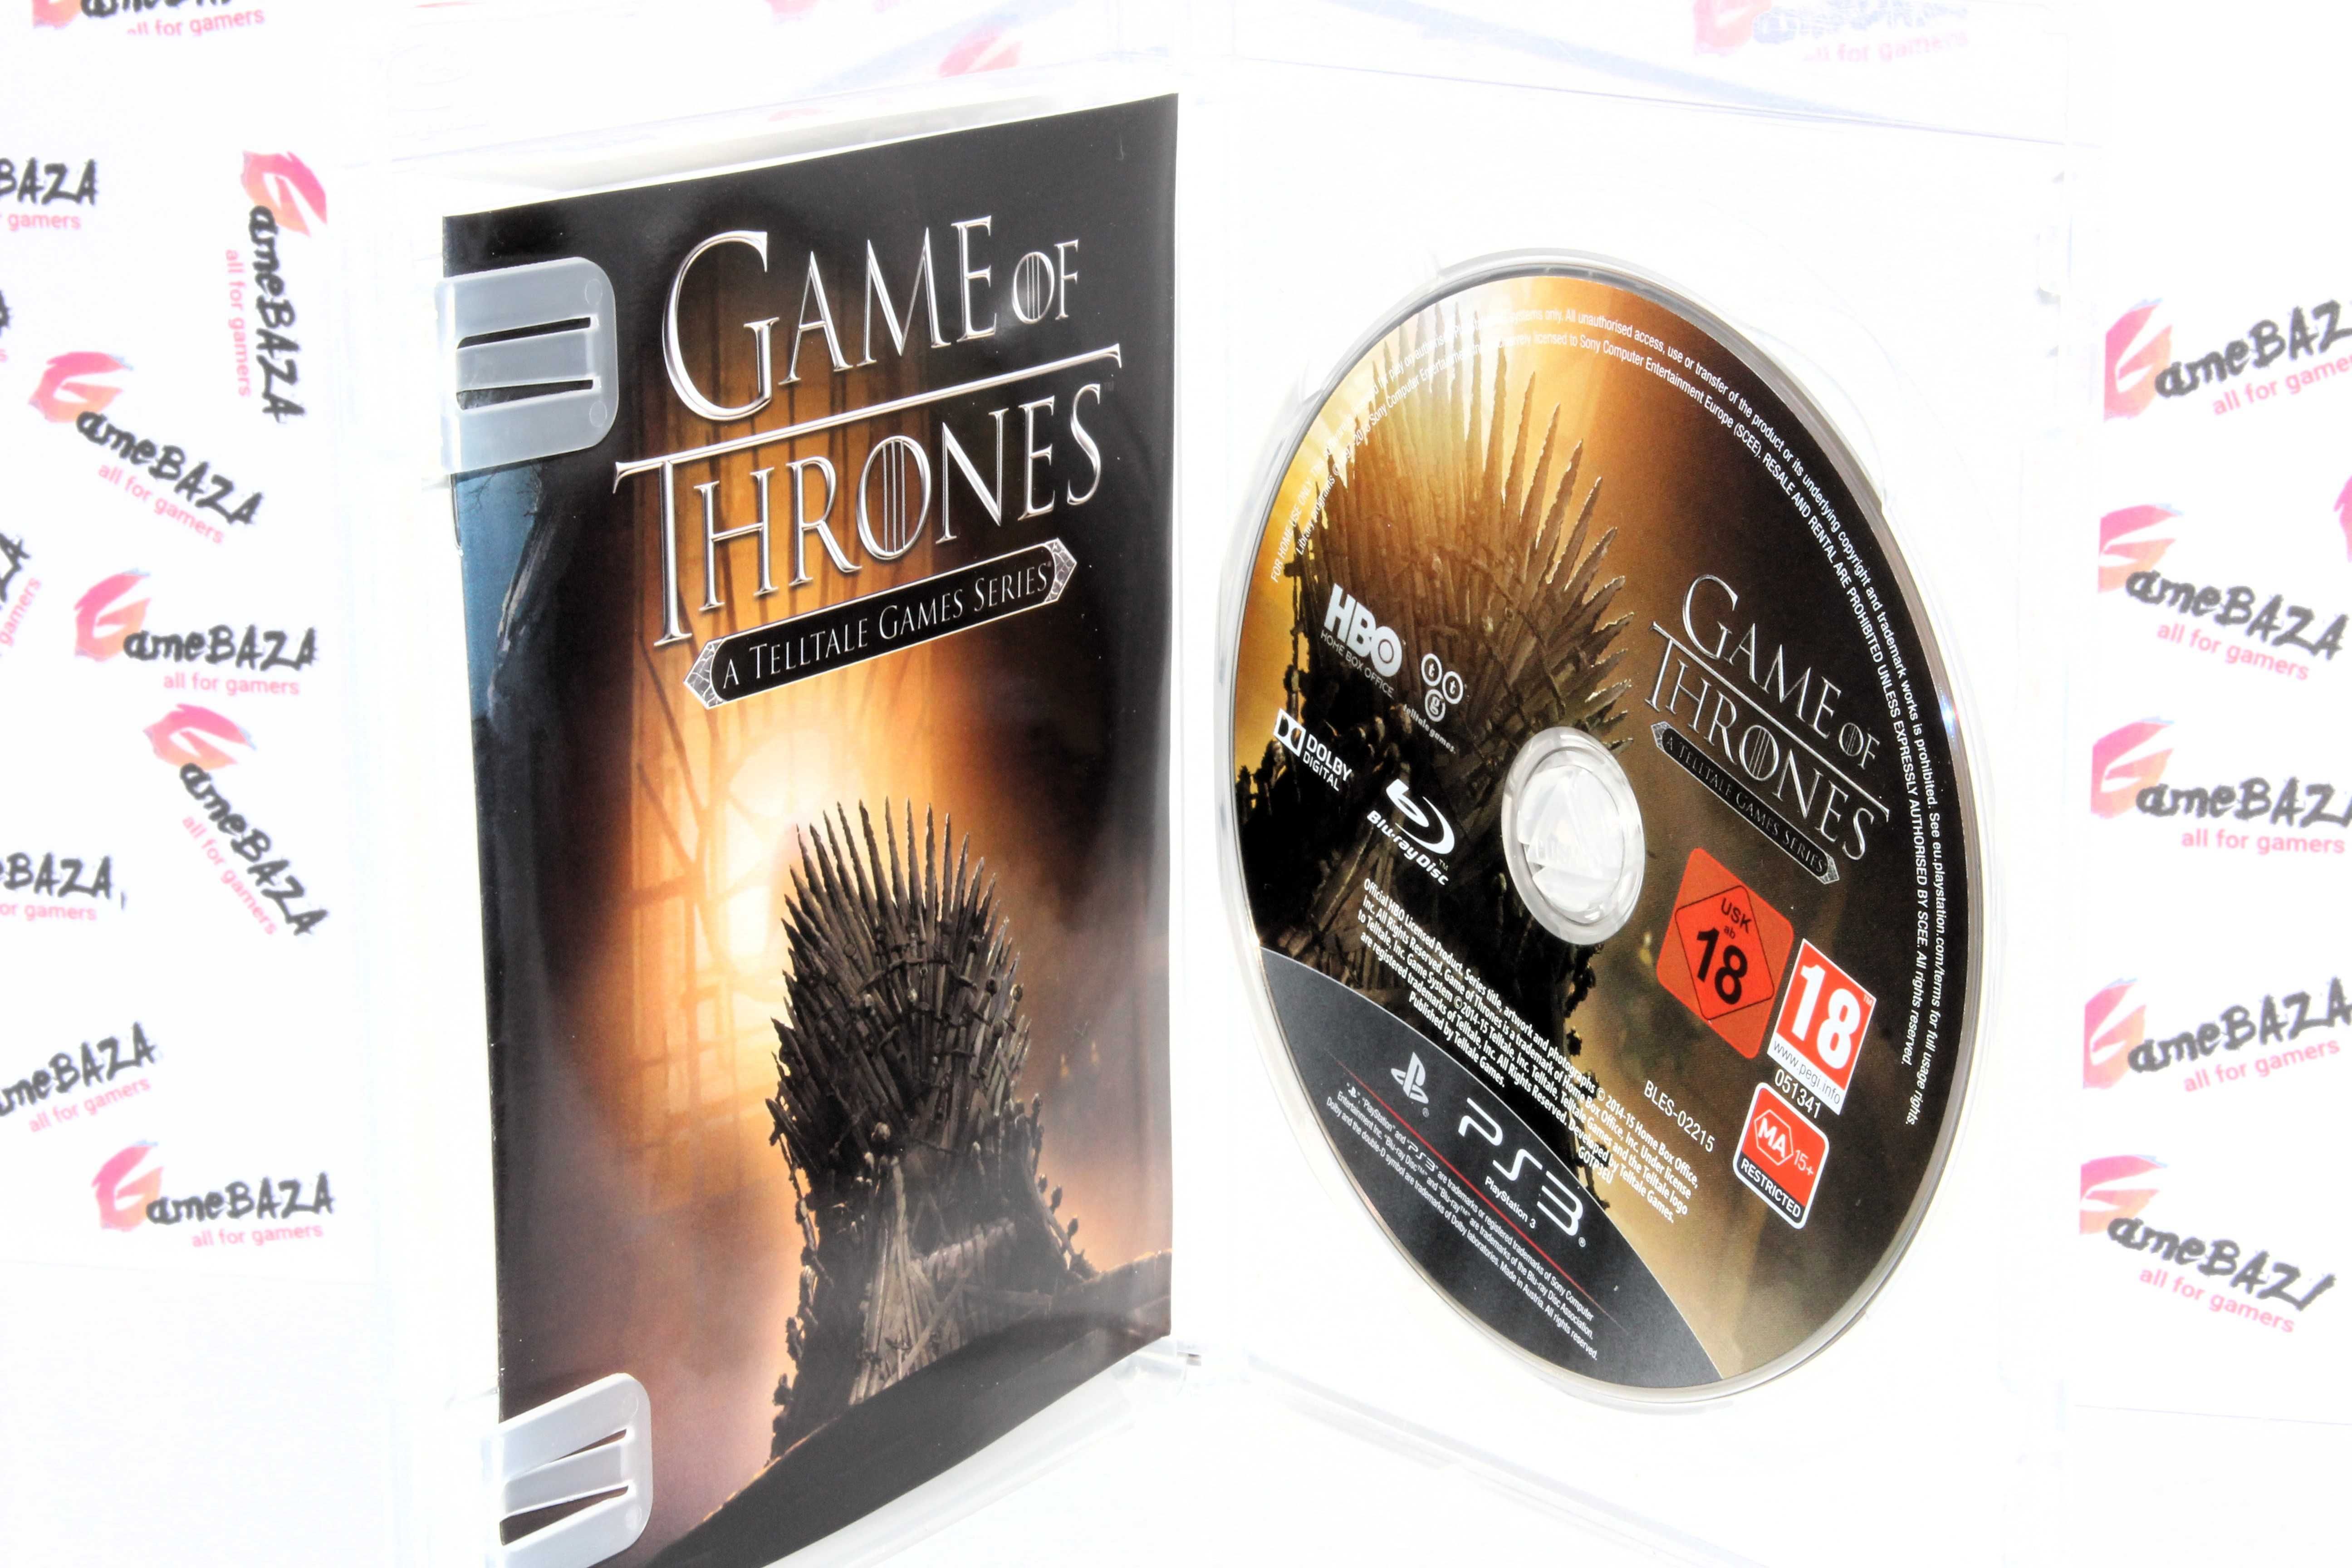 Game of Thrones PS3 GameBAZA